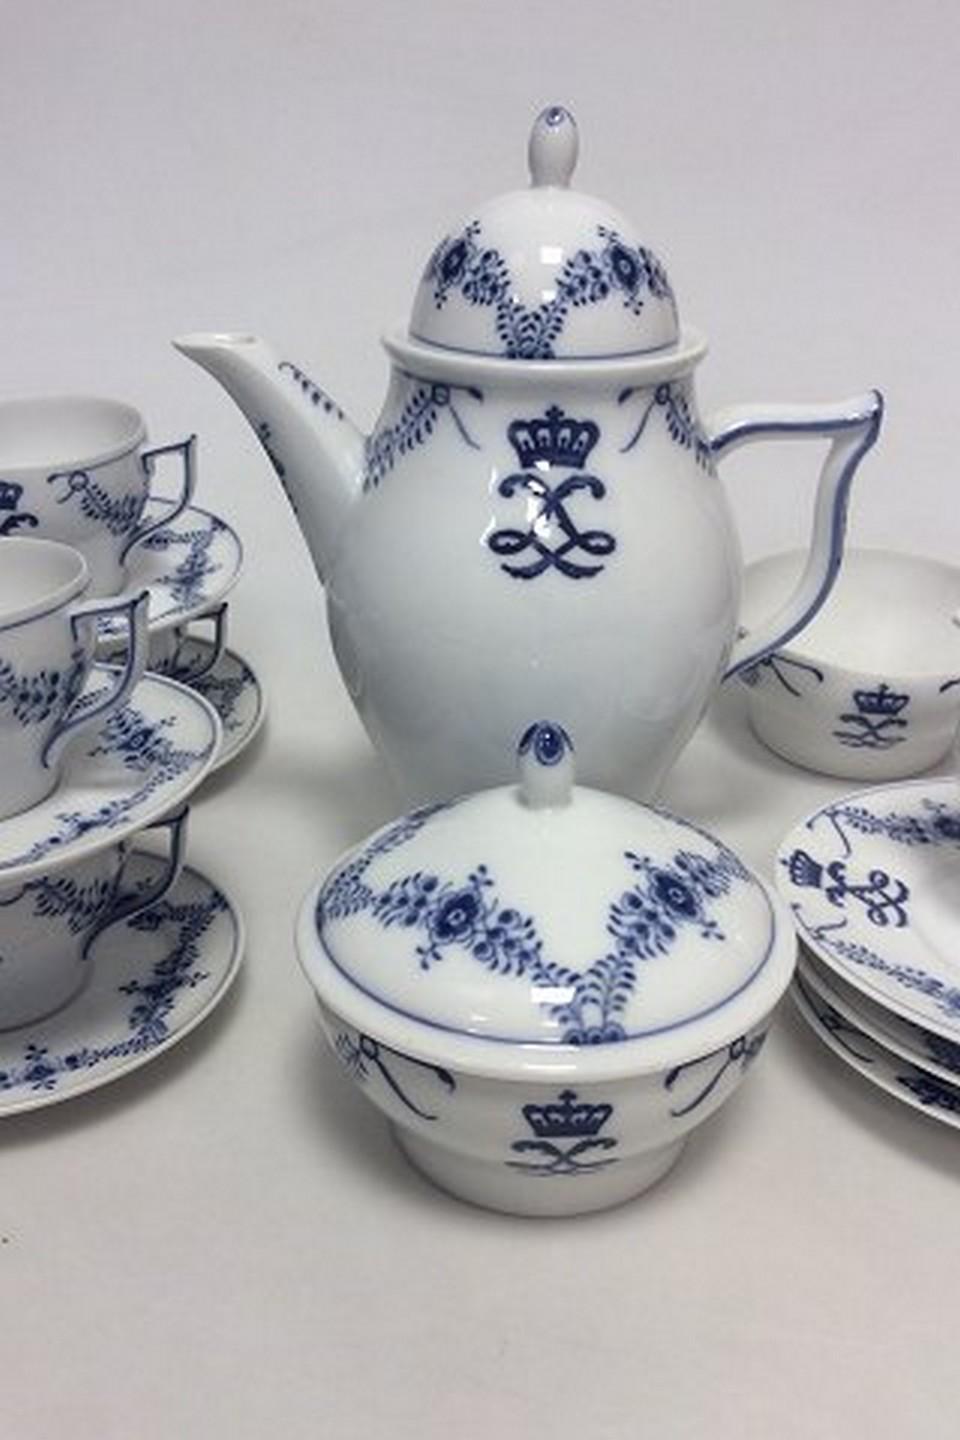 Royal Copenhagen blue fluted queen Louise Sociaty coffee set.
Service made for the Queen Louise Sociaty.
The set consist of coffee pot, creamer, sugar bowl with lid, sugar bowl without lid, 4 x coffee cups and saucers, 2 side plates, 1 side plate